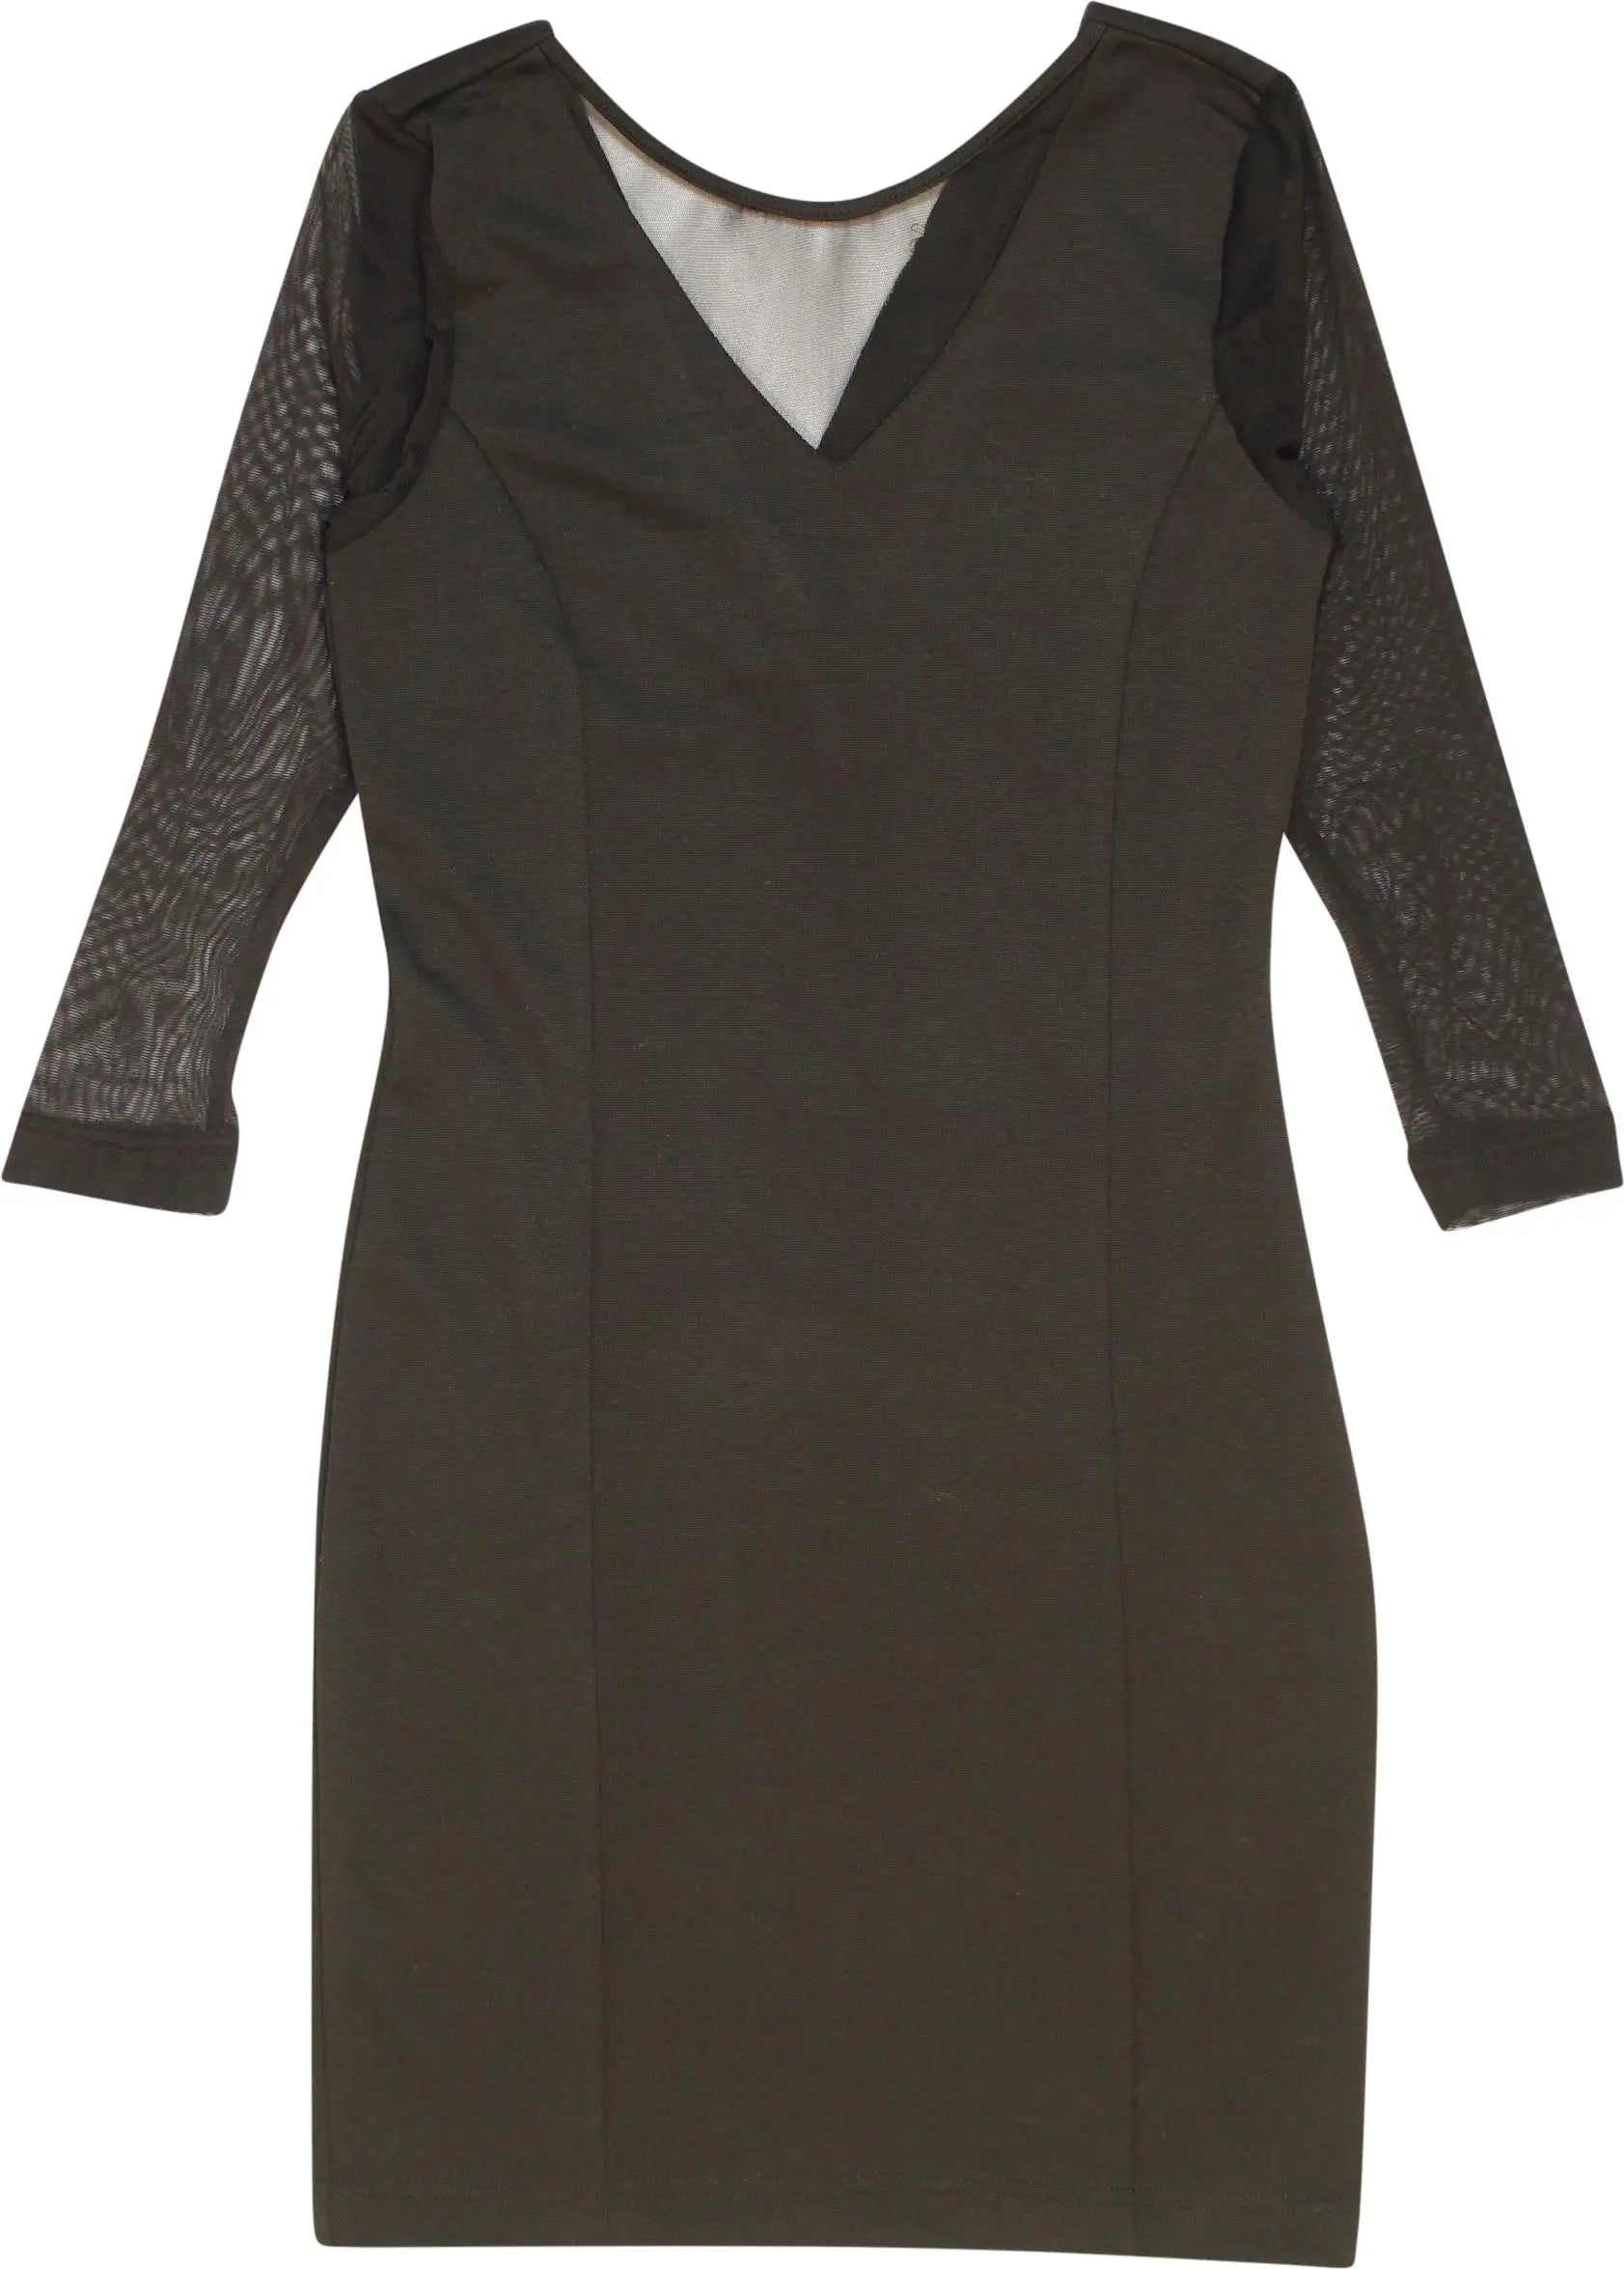 Vero Moda - Black Dress with Mesh- ThriftTale.com - Vintage and second handclothing